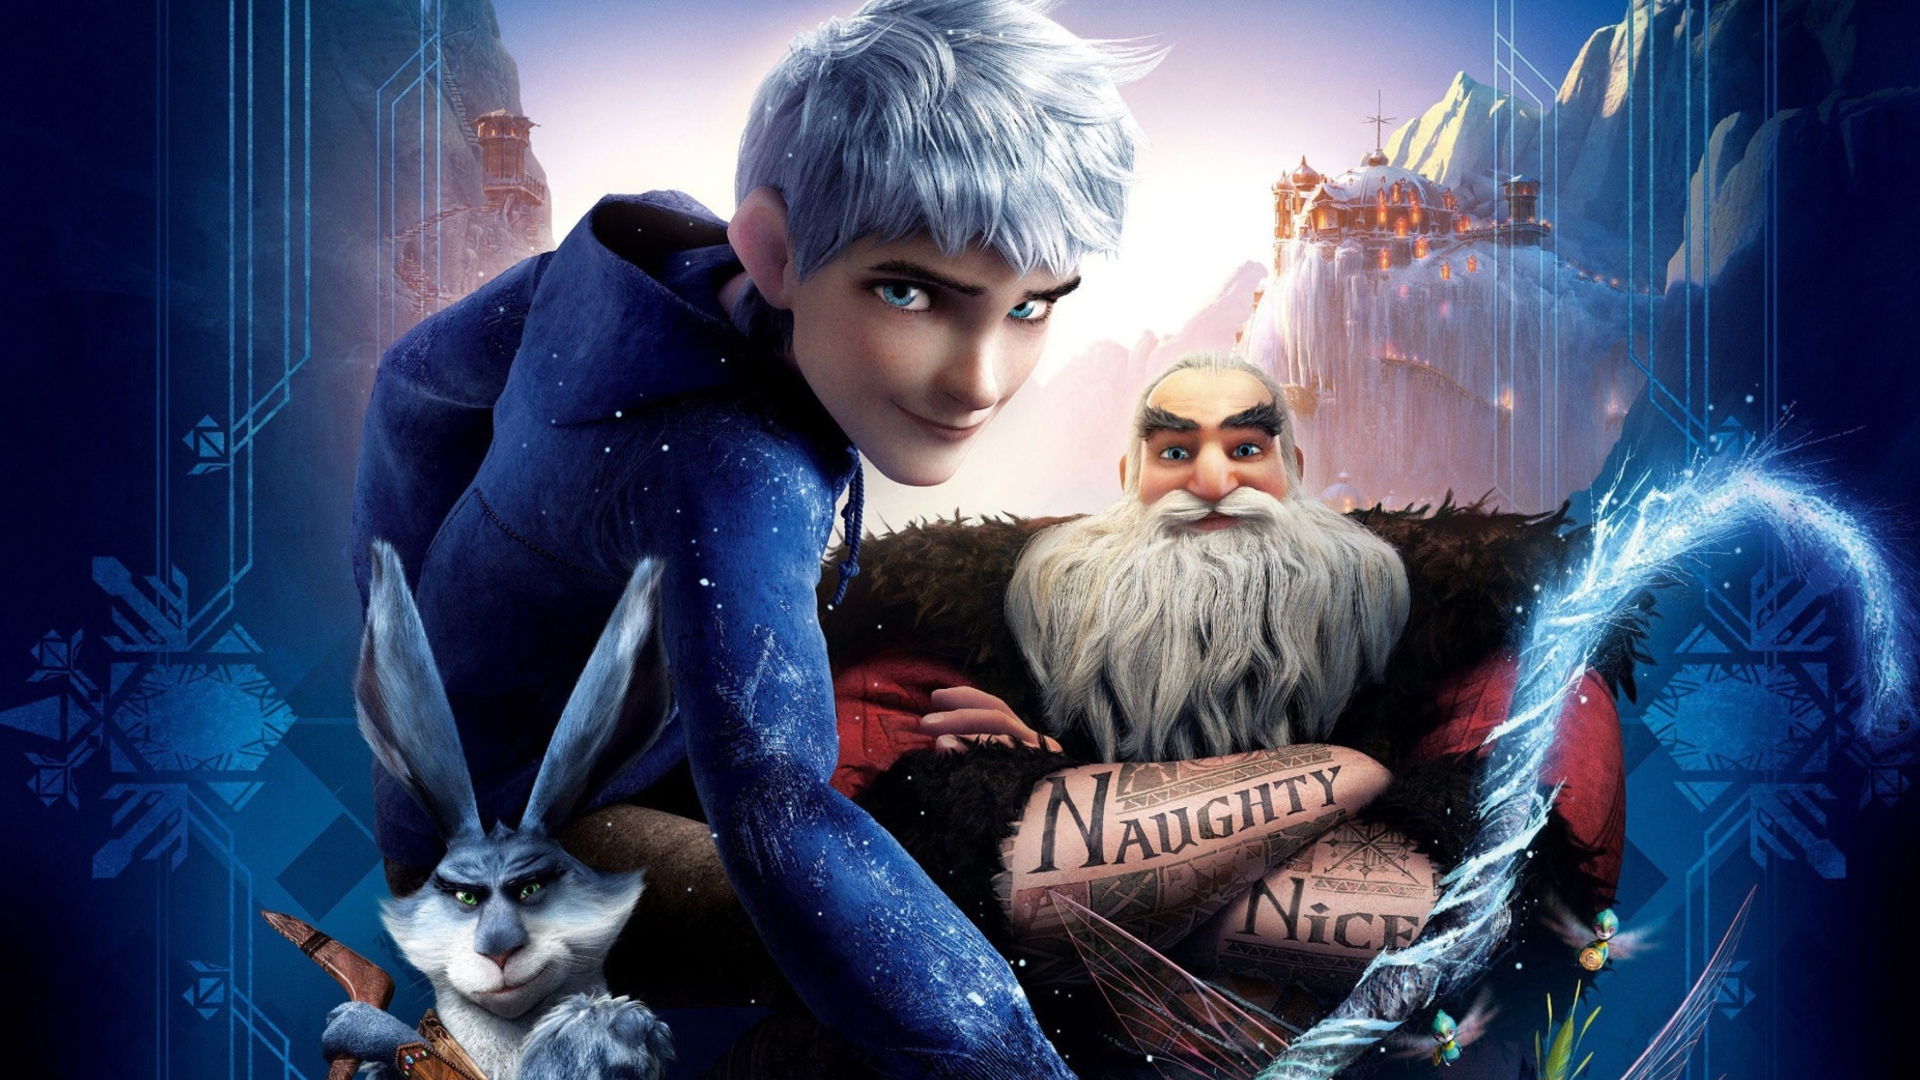 Jack Frost - Rise Of The Guardians wallpaper 1920x1080